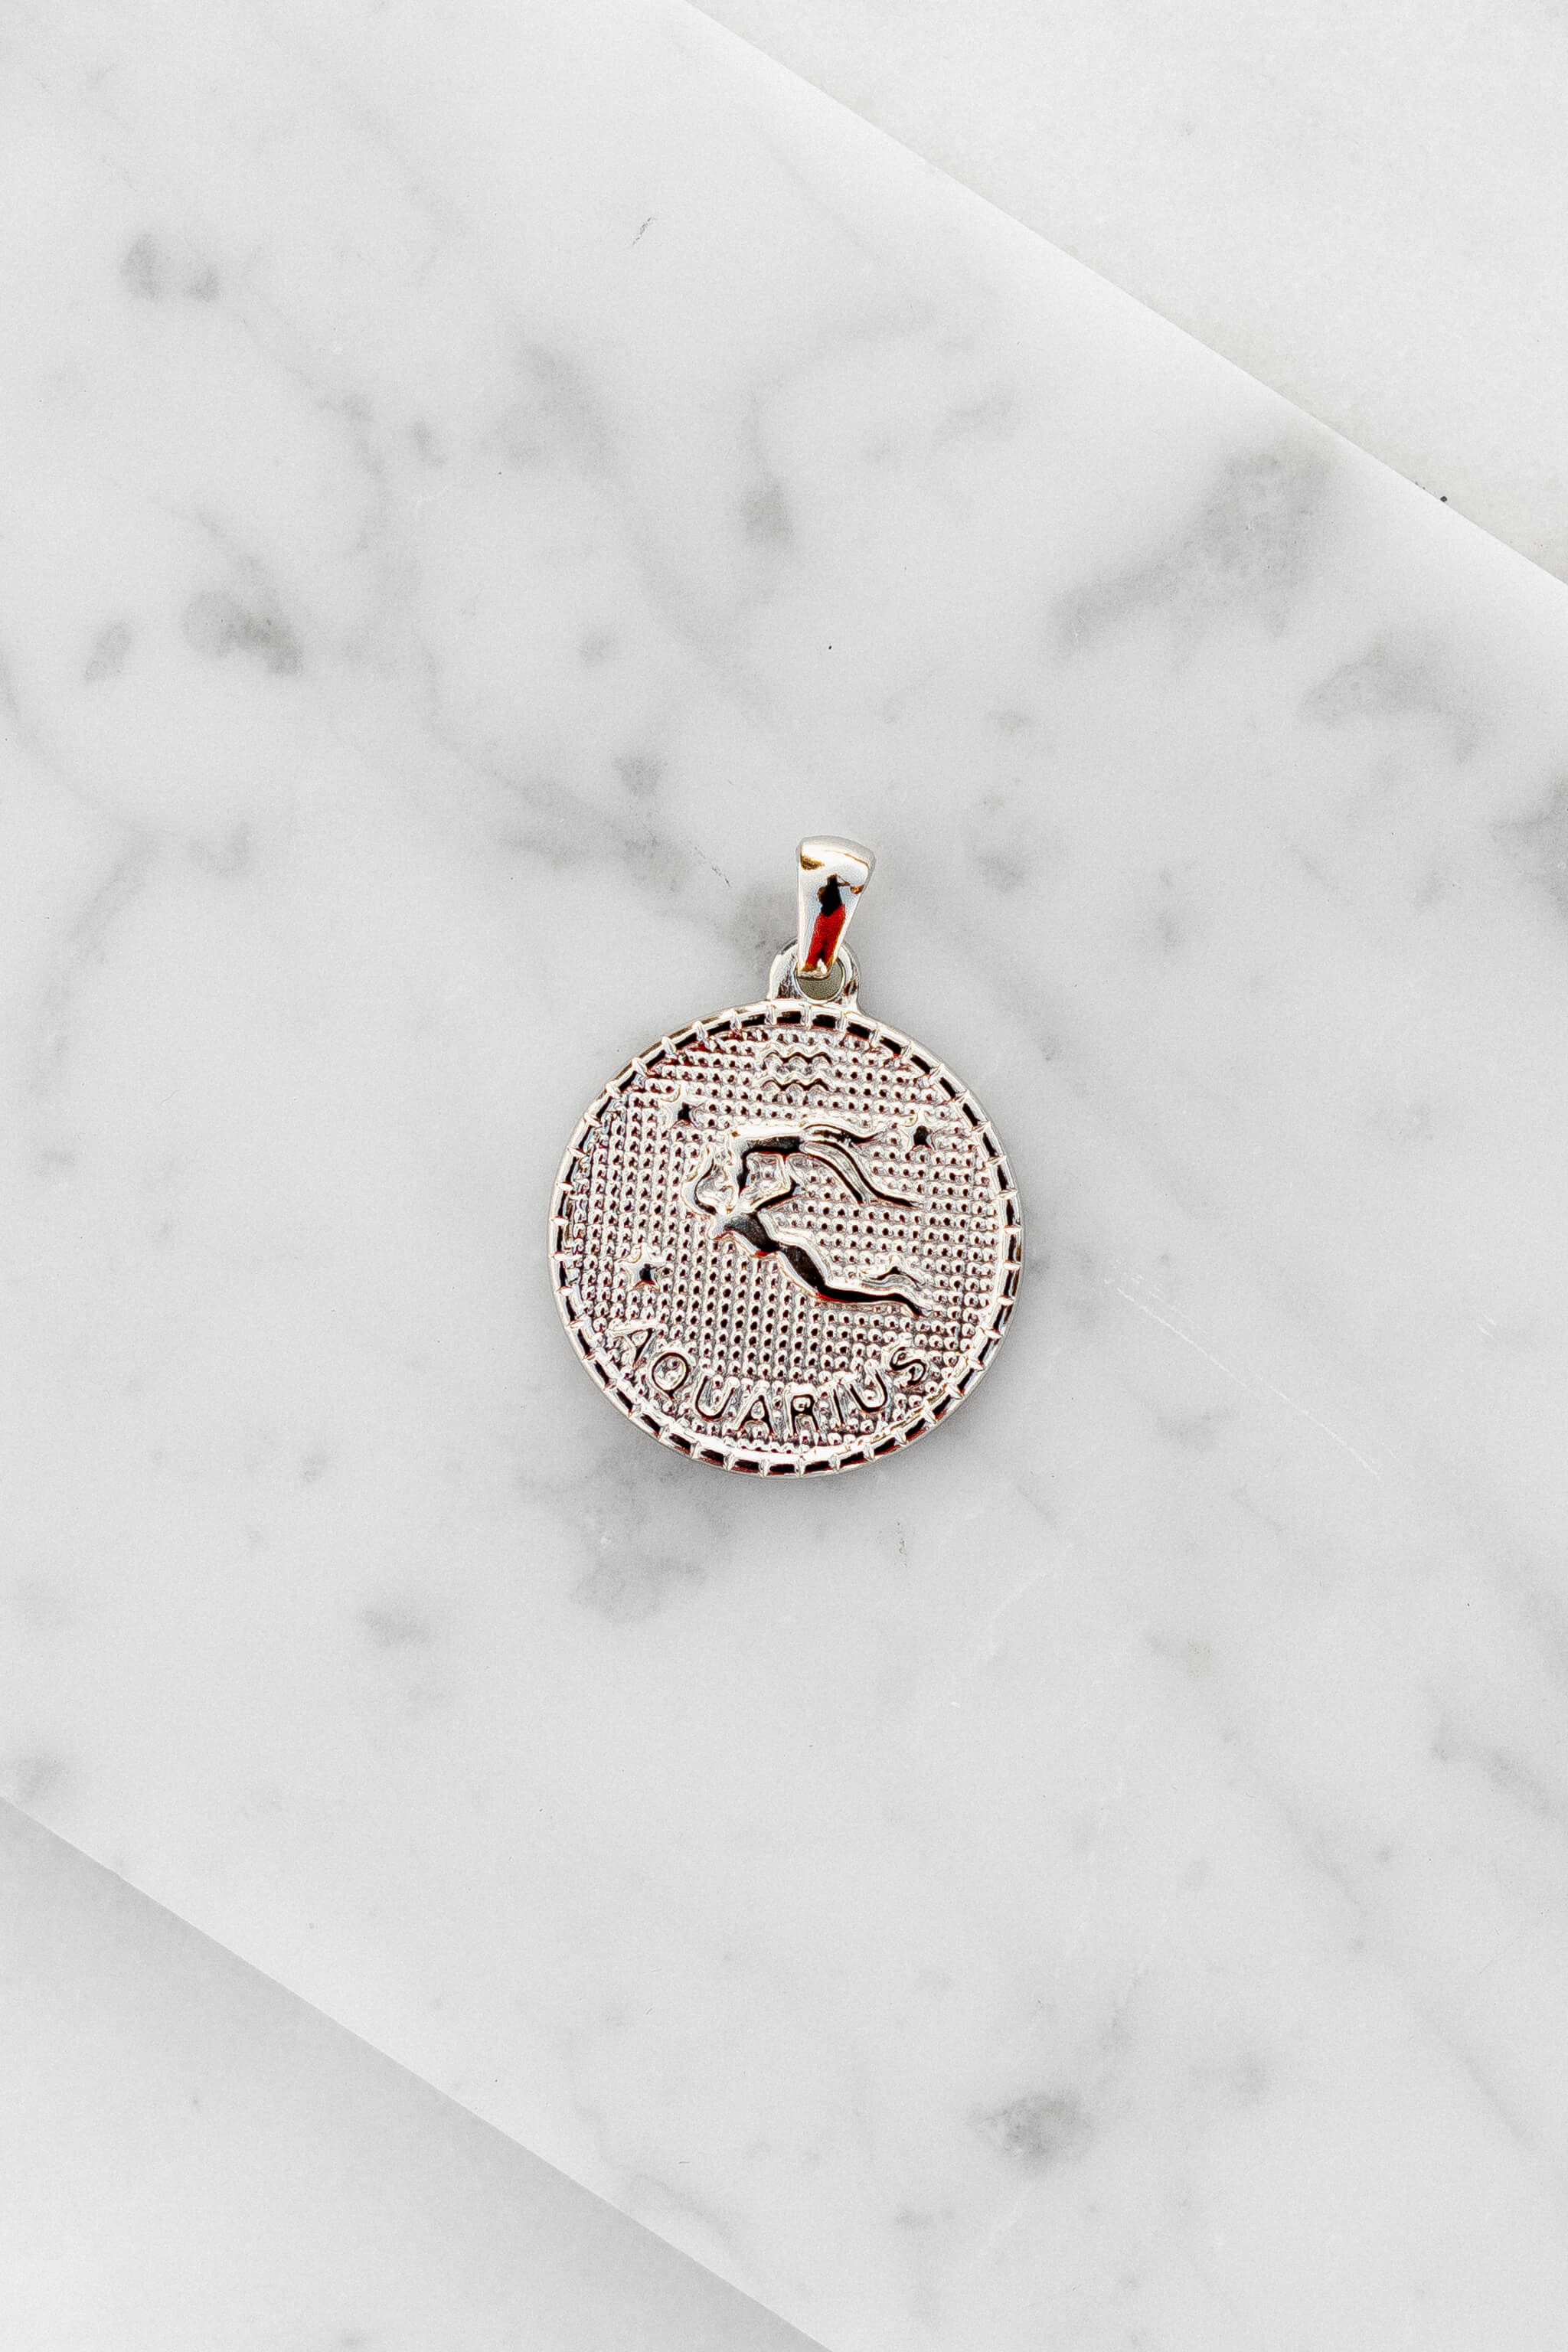 Aquarius zodiac sign silver coin charm laying on a white marble